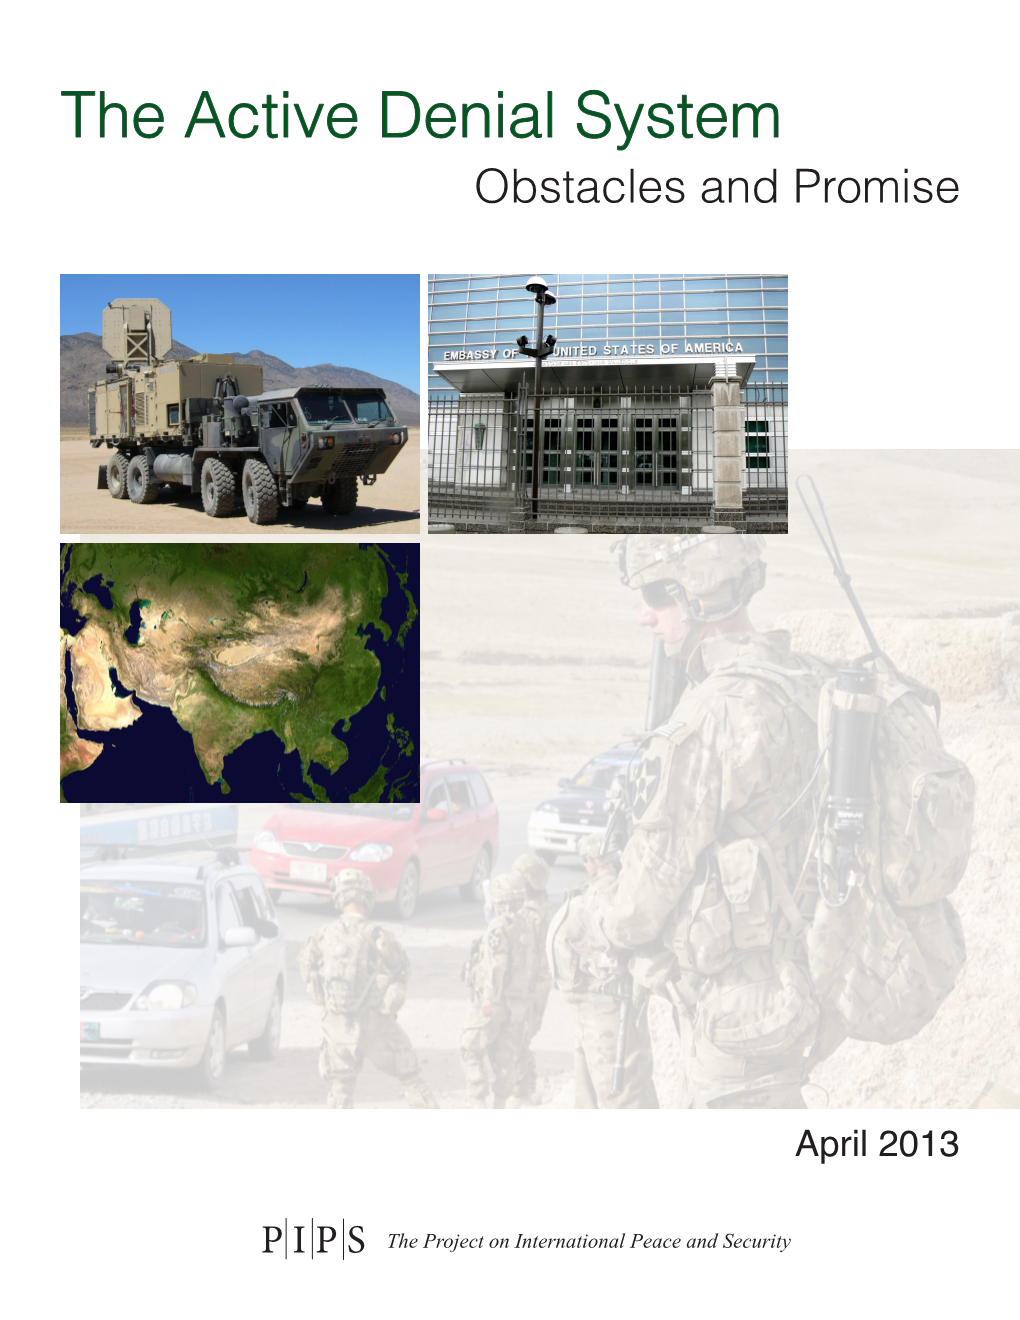 The Active Denial System Obstacles and Promise